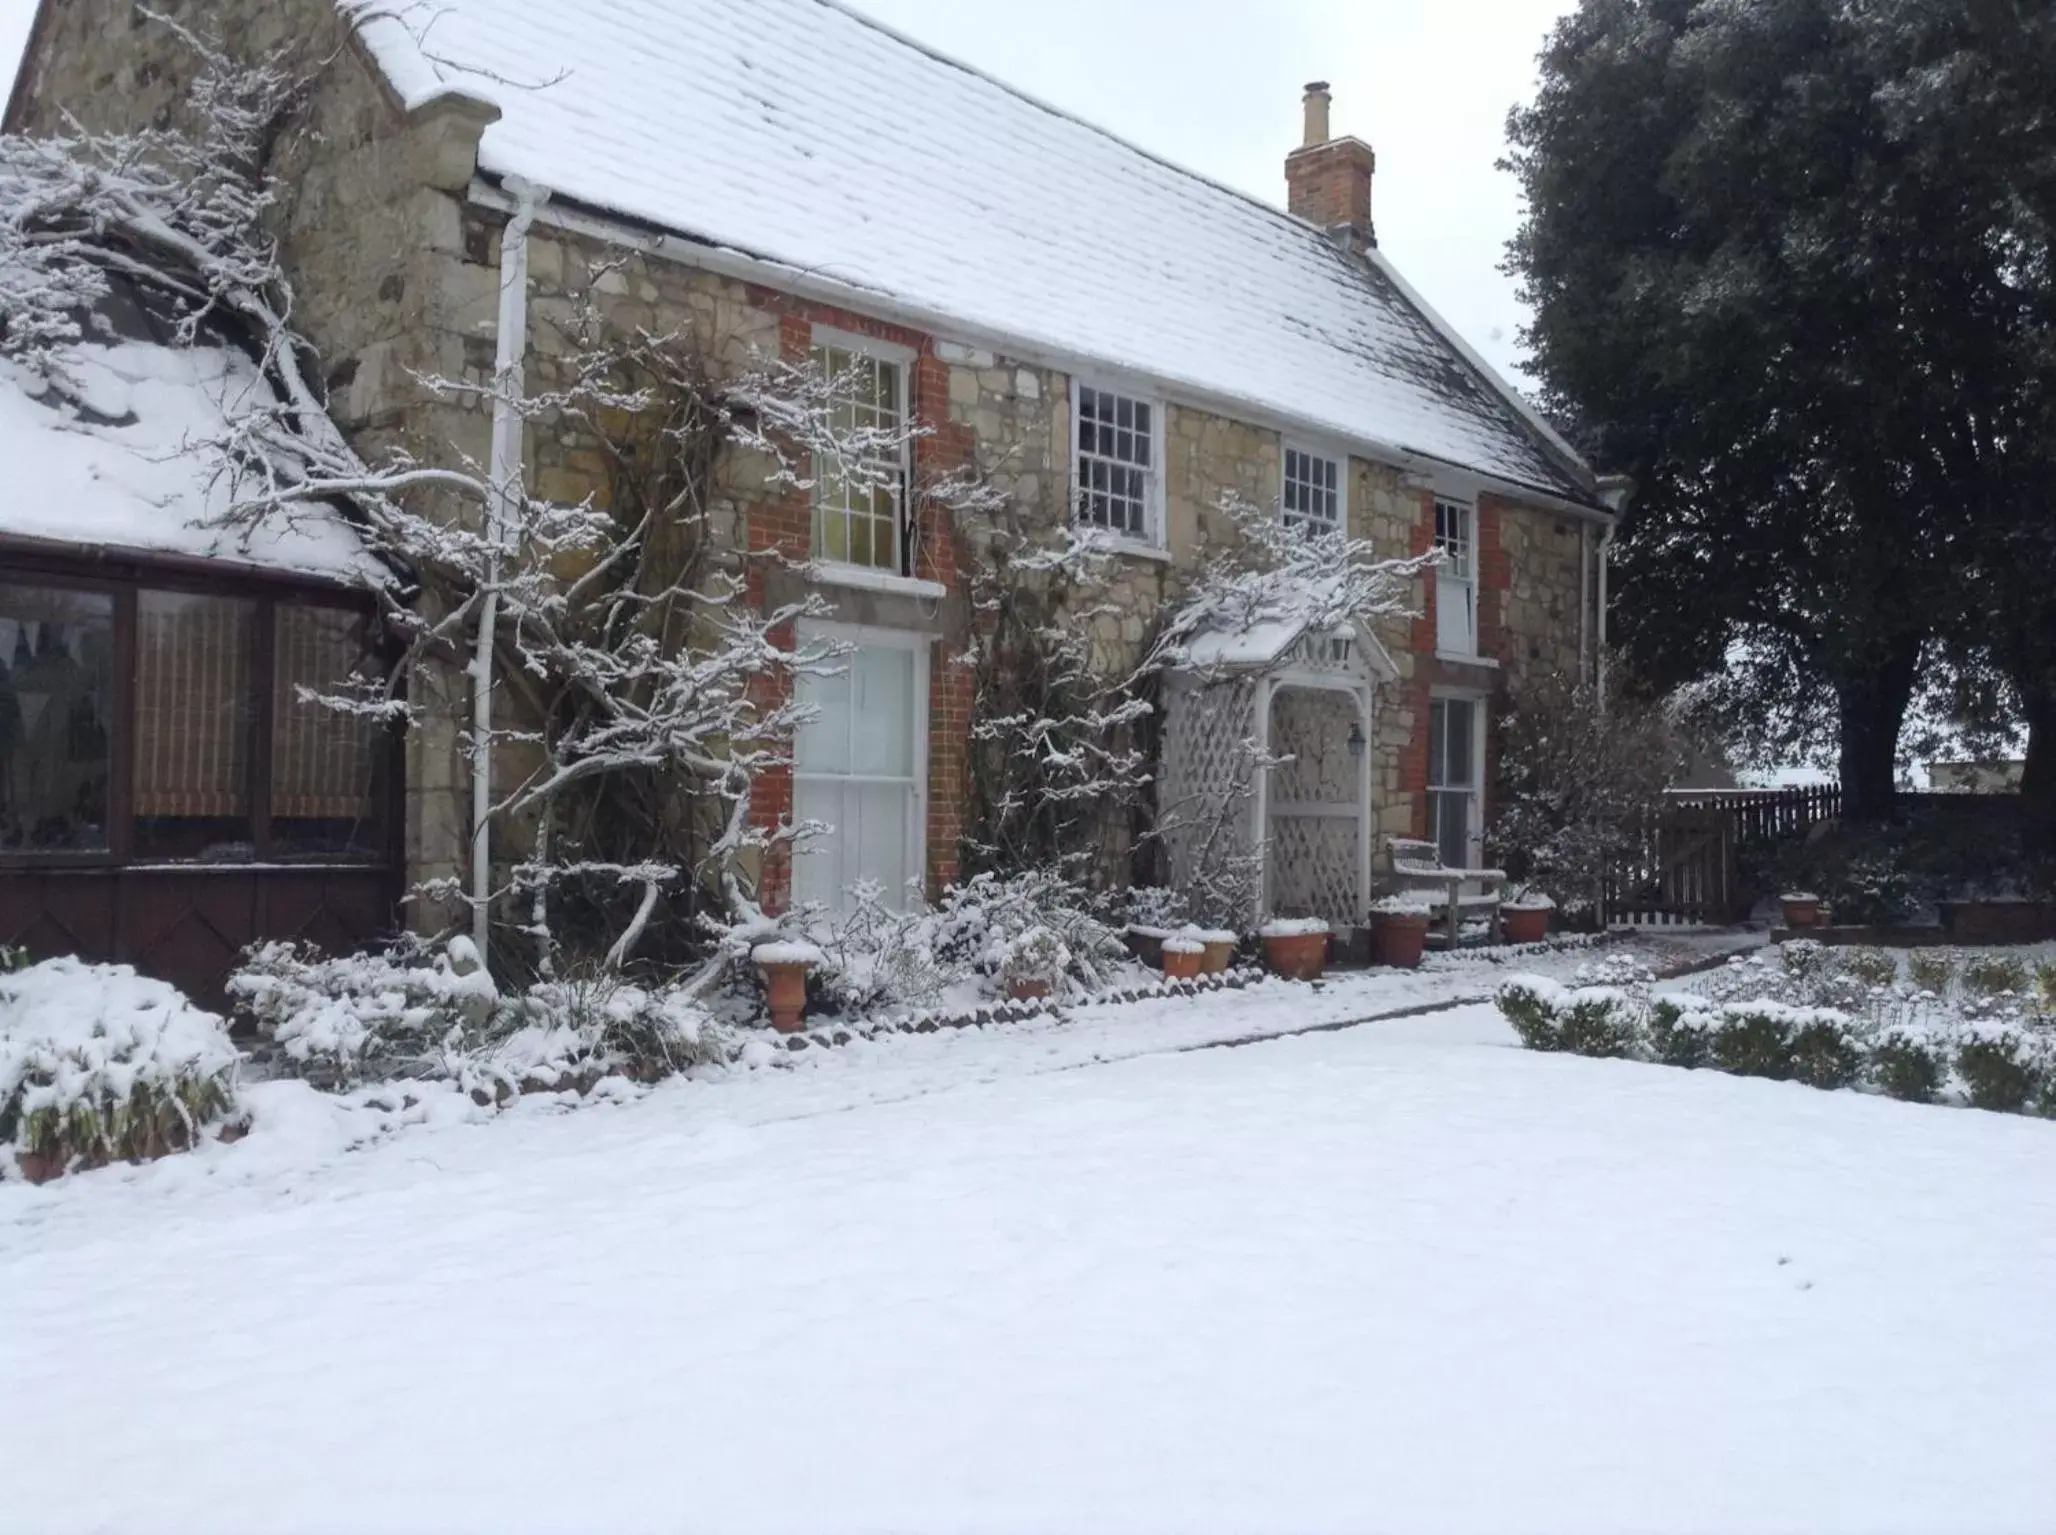 Property building, Winter in Stroud House